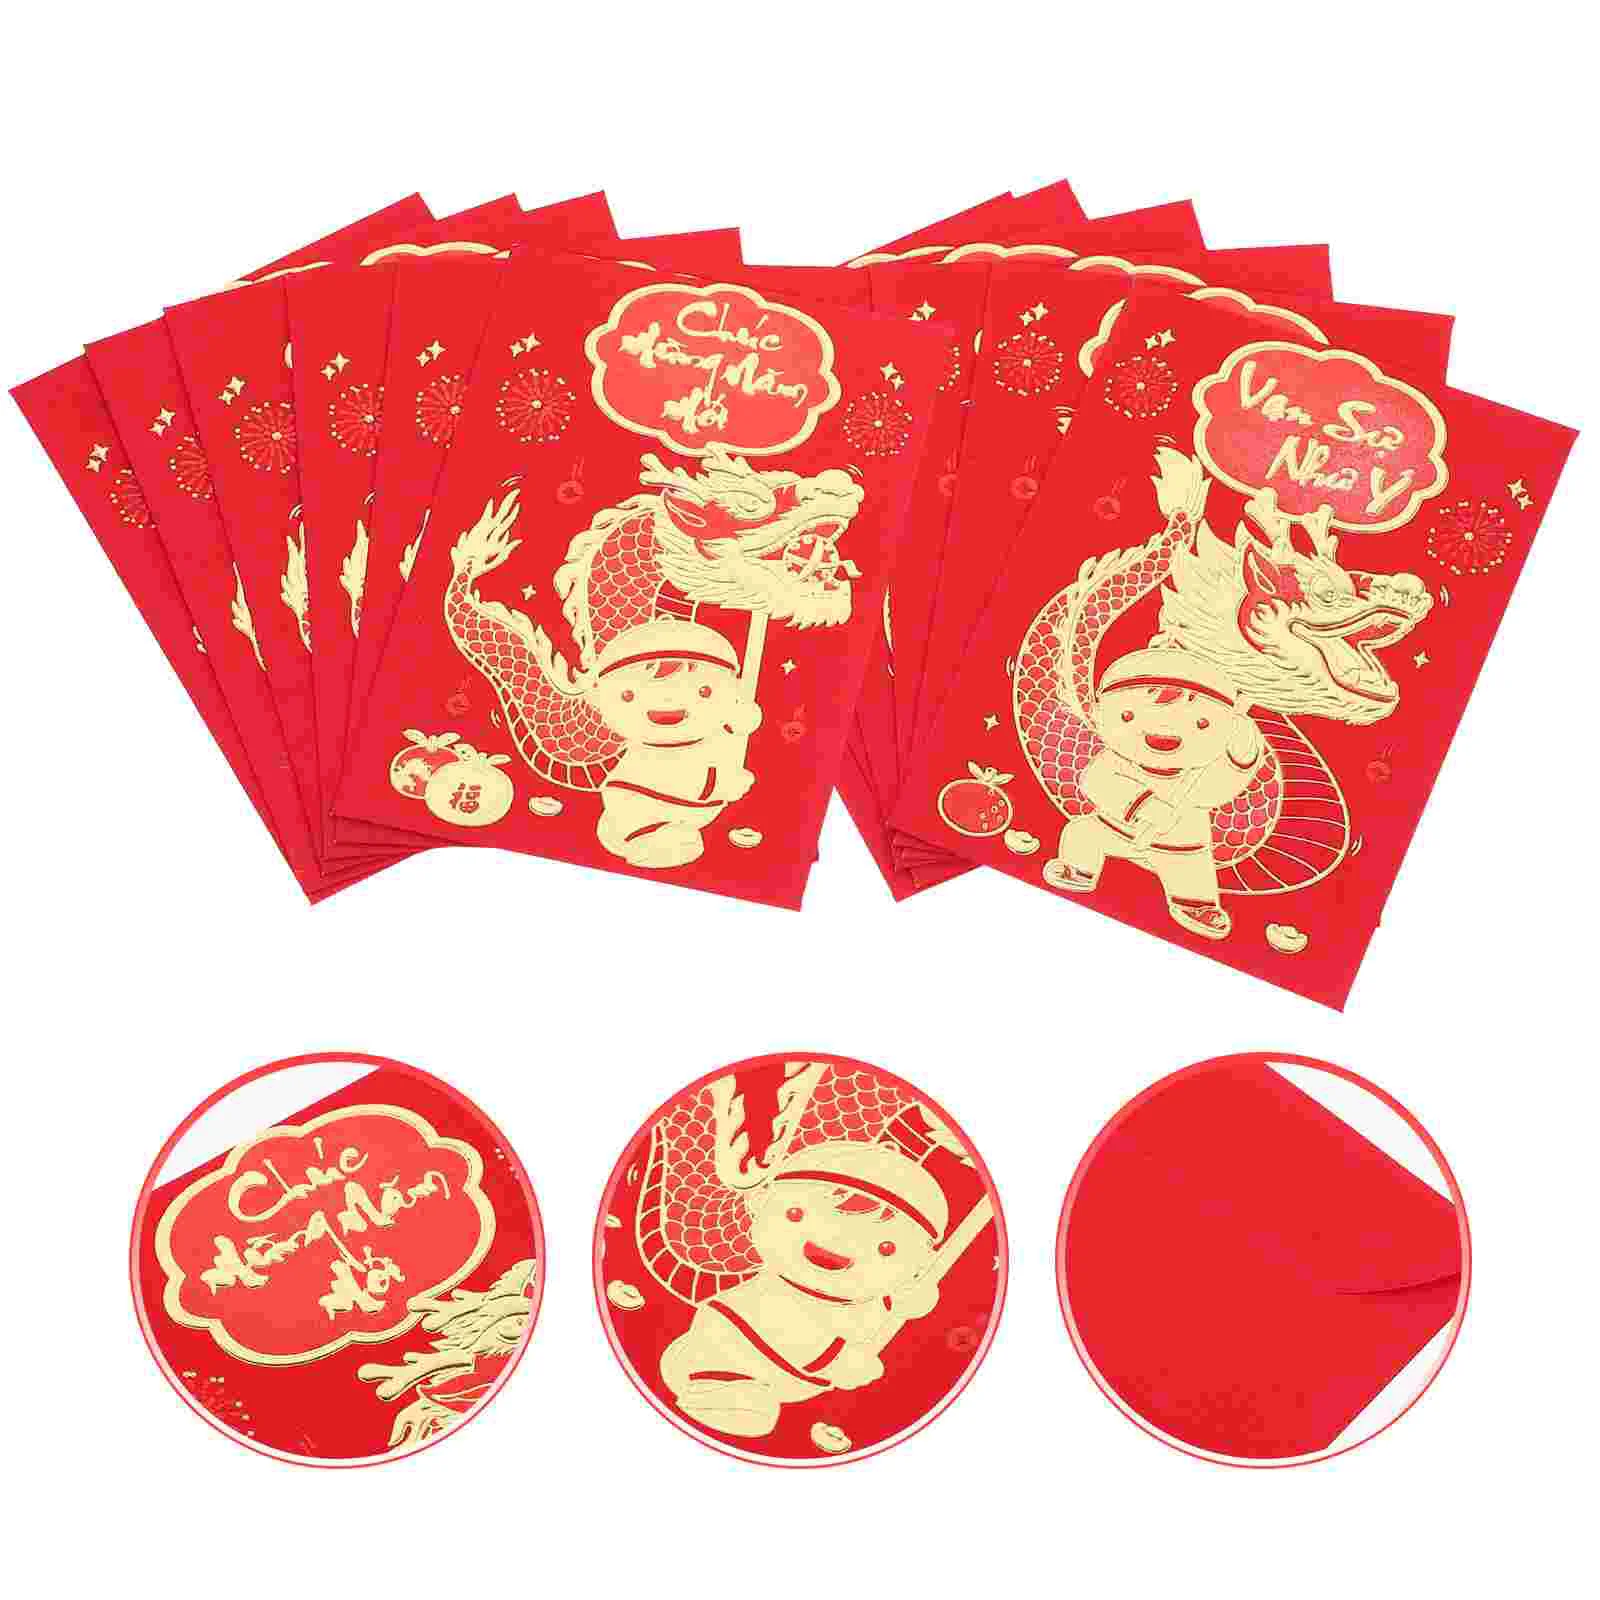 Money Red Pockets Chinese Lucky Money Envelopes Year Red Envelopes Cash Envelopes Money Bags Random Style